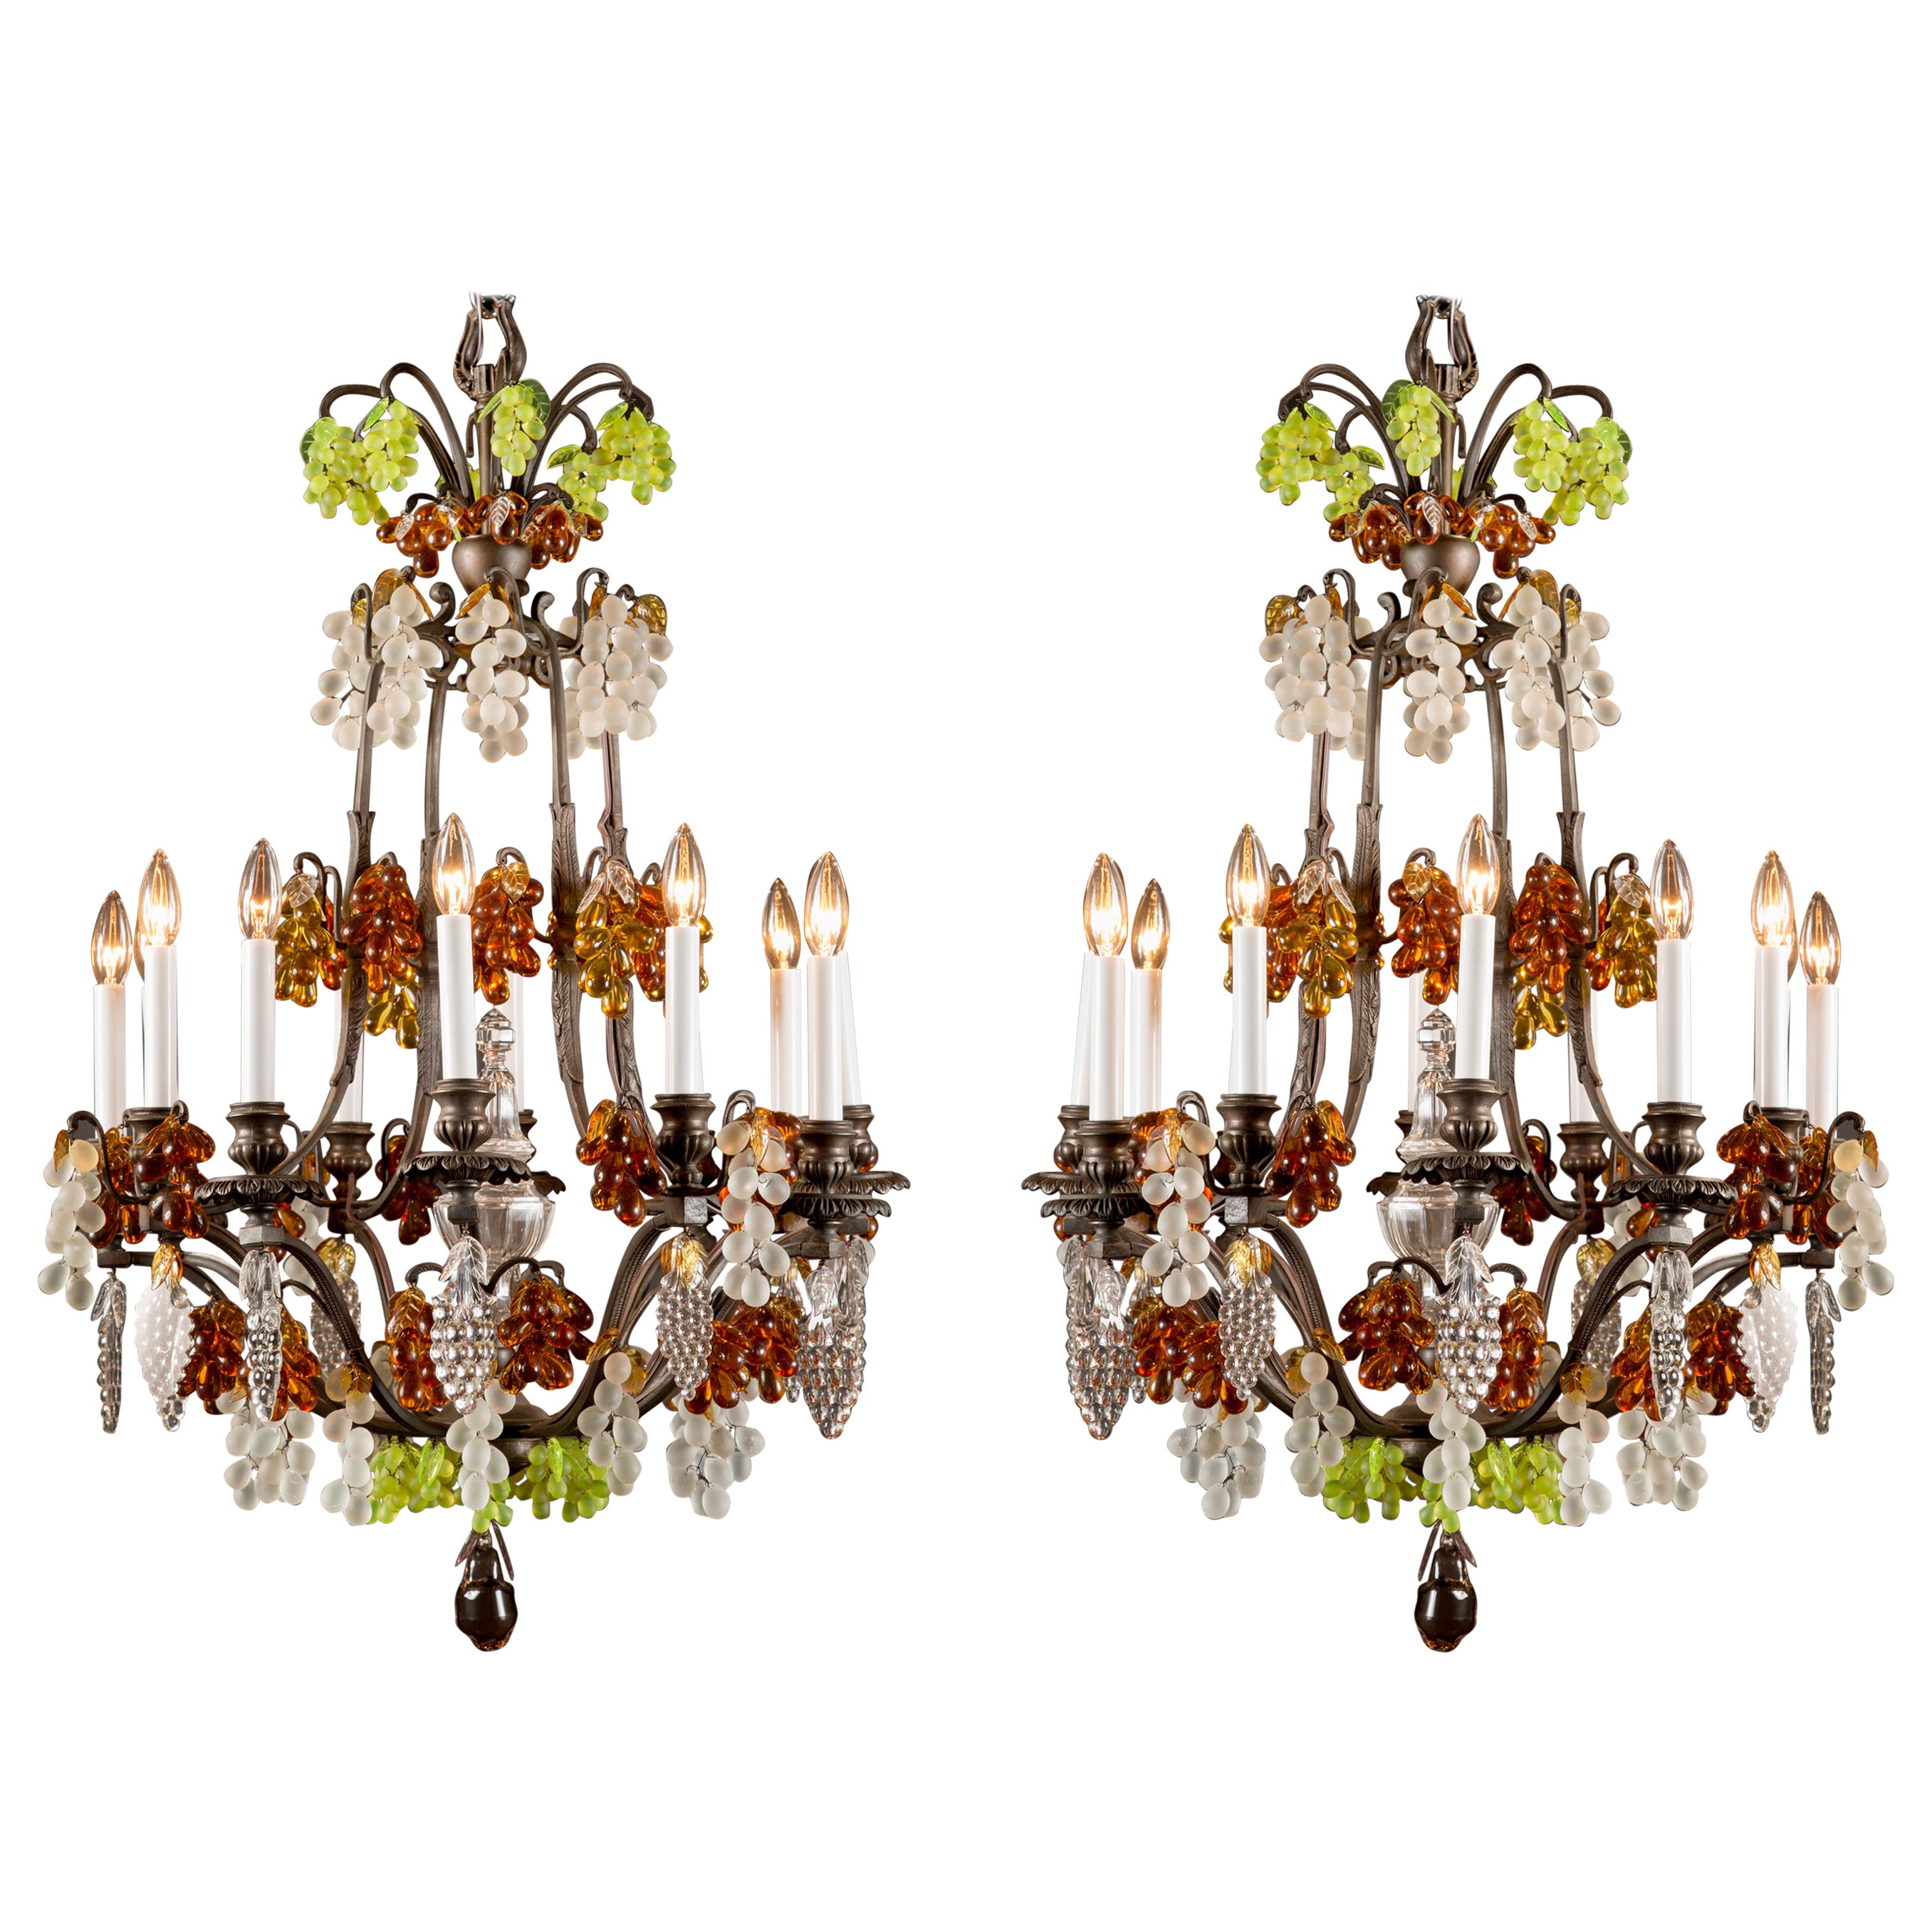 Pair of French Louis XV Patinated Bronze & Crystal Chandeliers, 19th Century For Sale